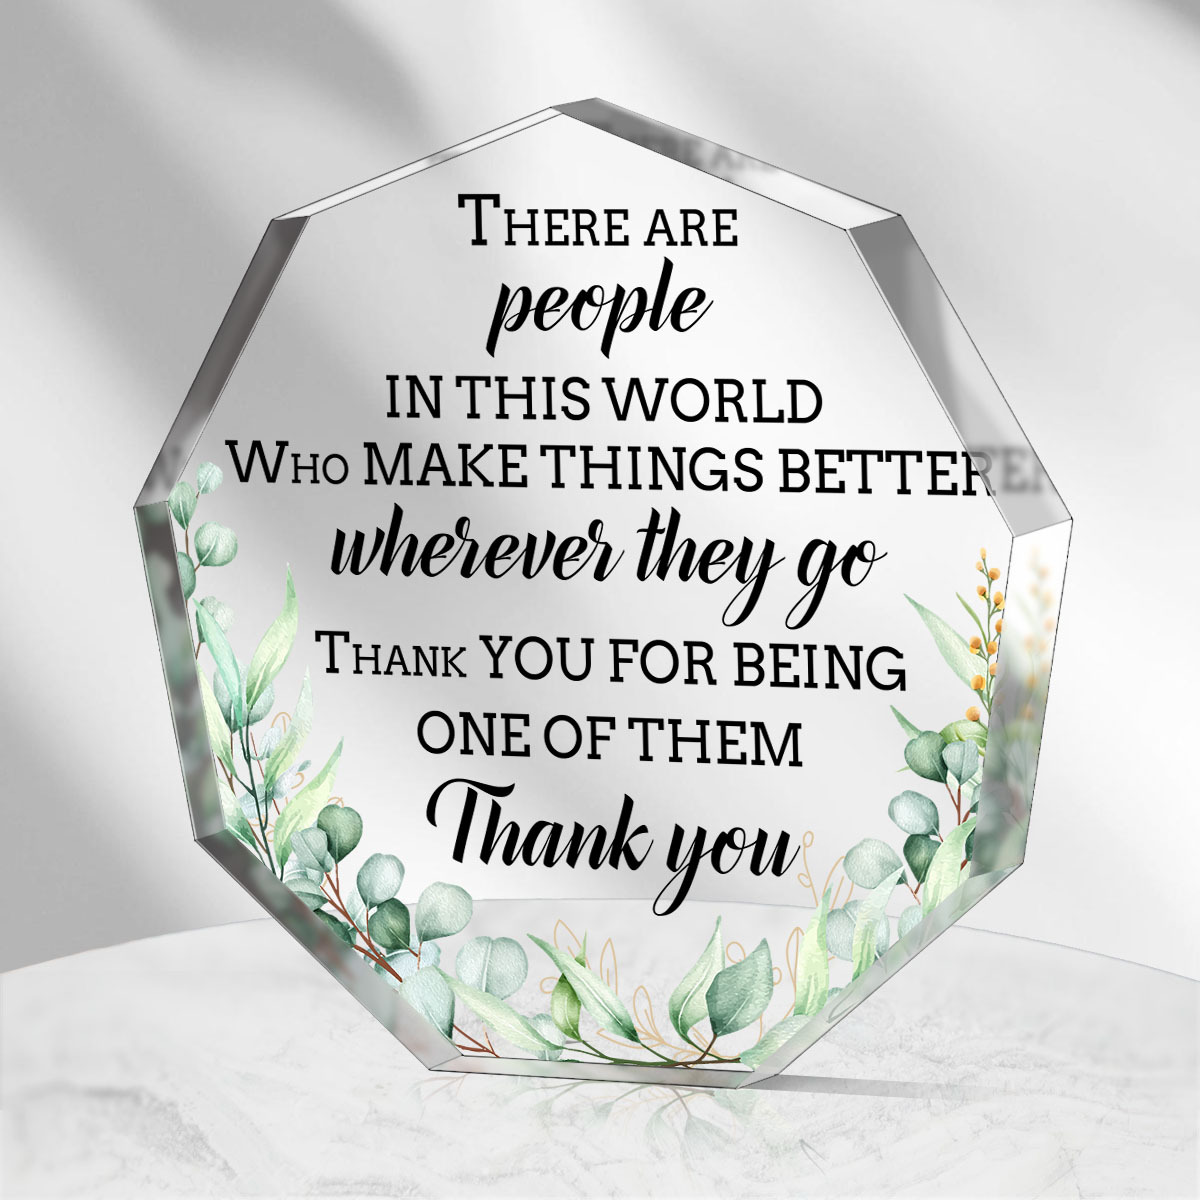 Thank You Gifts For Women Inspirational Employee Appreciation Gifts  Personalized Women Coworker Gifts Under 10 Dollars Desk Office Colleague  Leaving